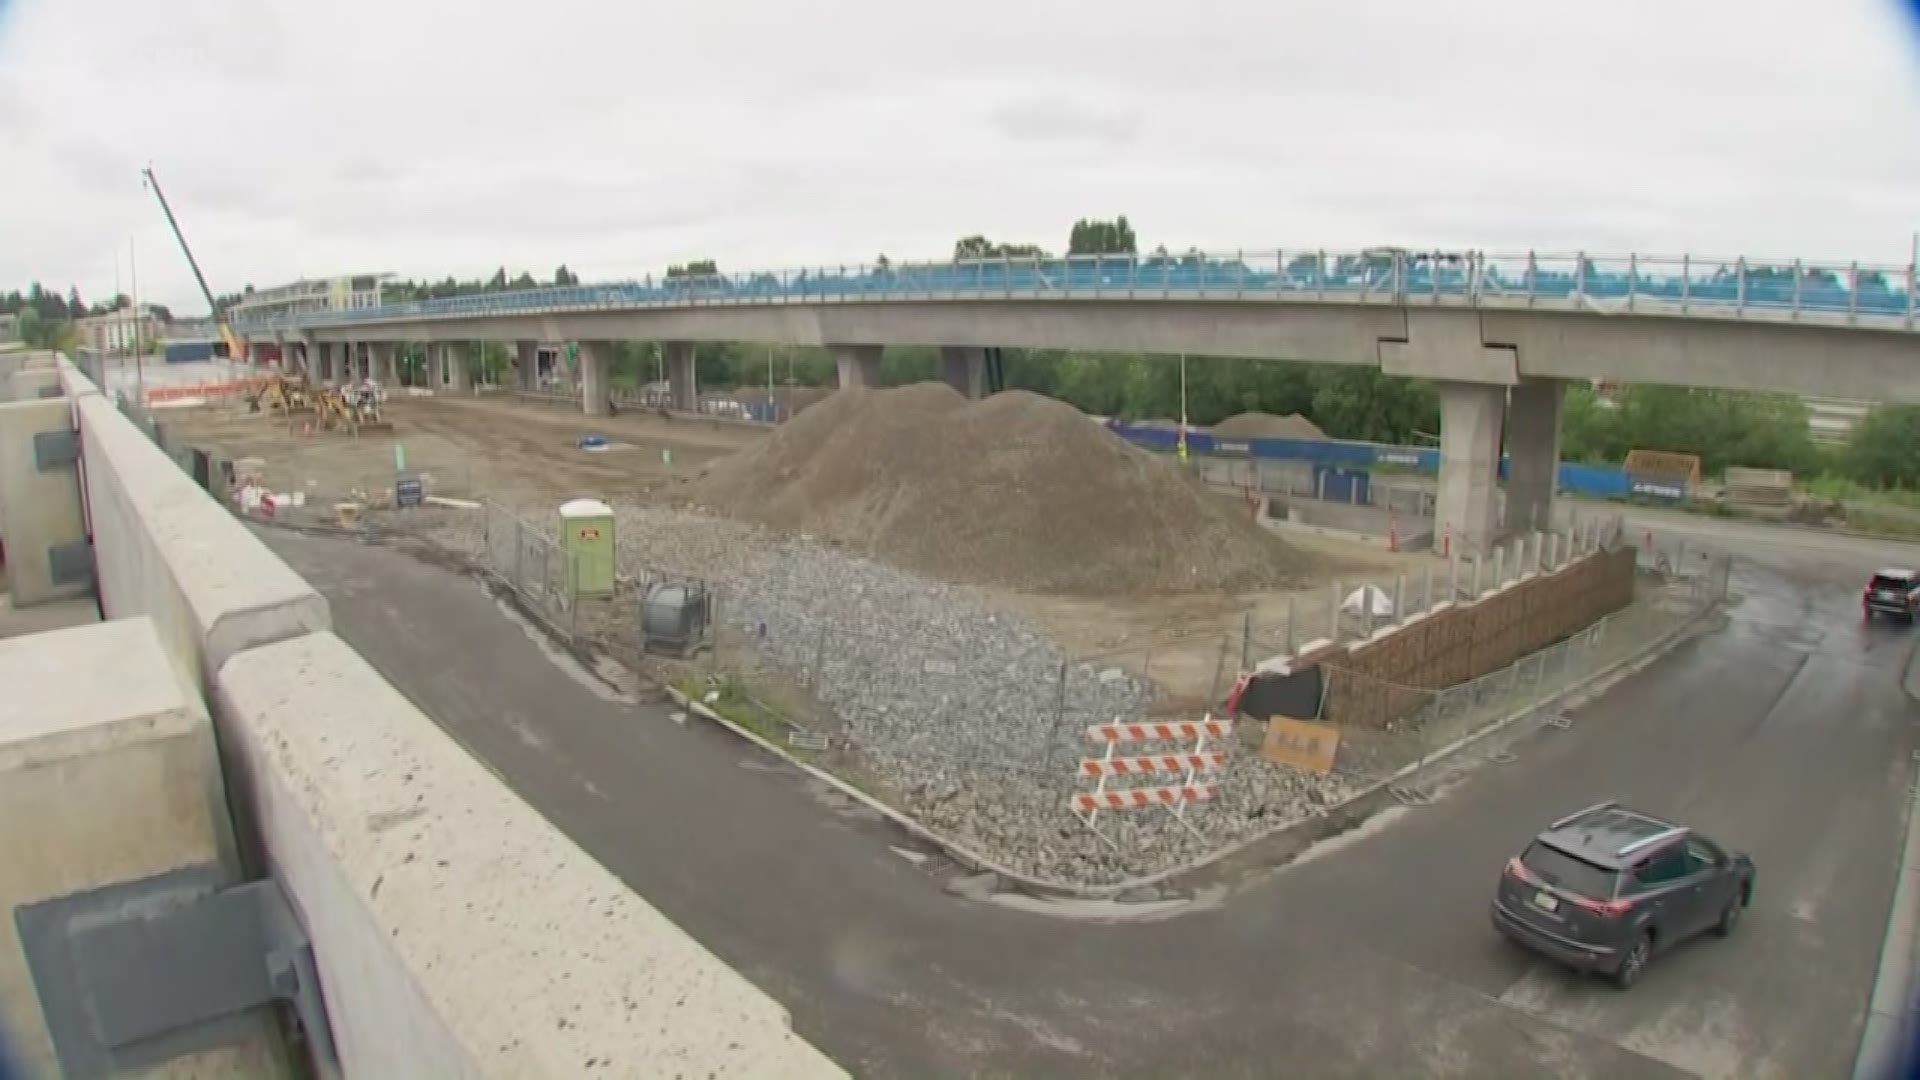 We now know when we will see bulldozers at Northgate Mall. Seattle's NHL team leaders revealed when they plan to break ground for part of a massive redevelopment. This as work at Seattle's KeyArena is already well underway. KING 5's Chris Daniels reports.